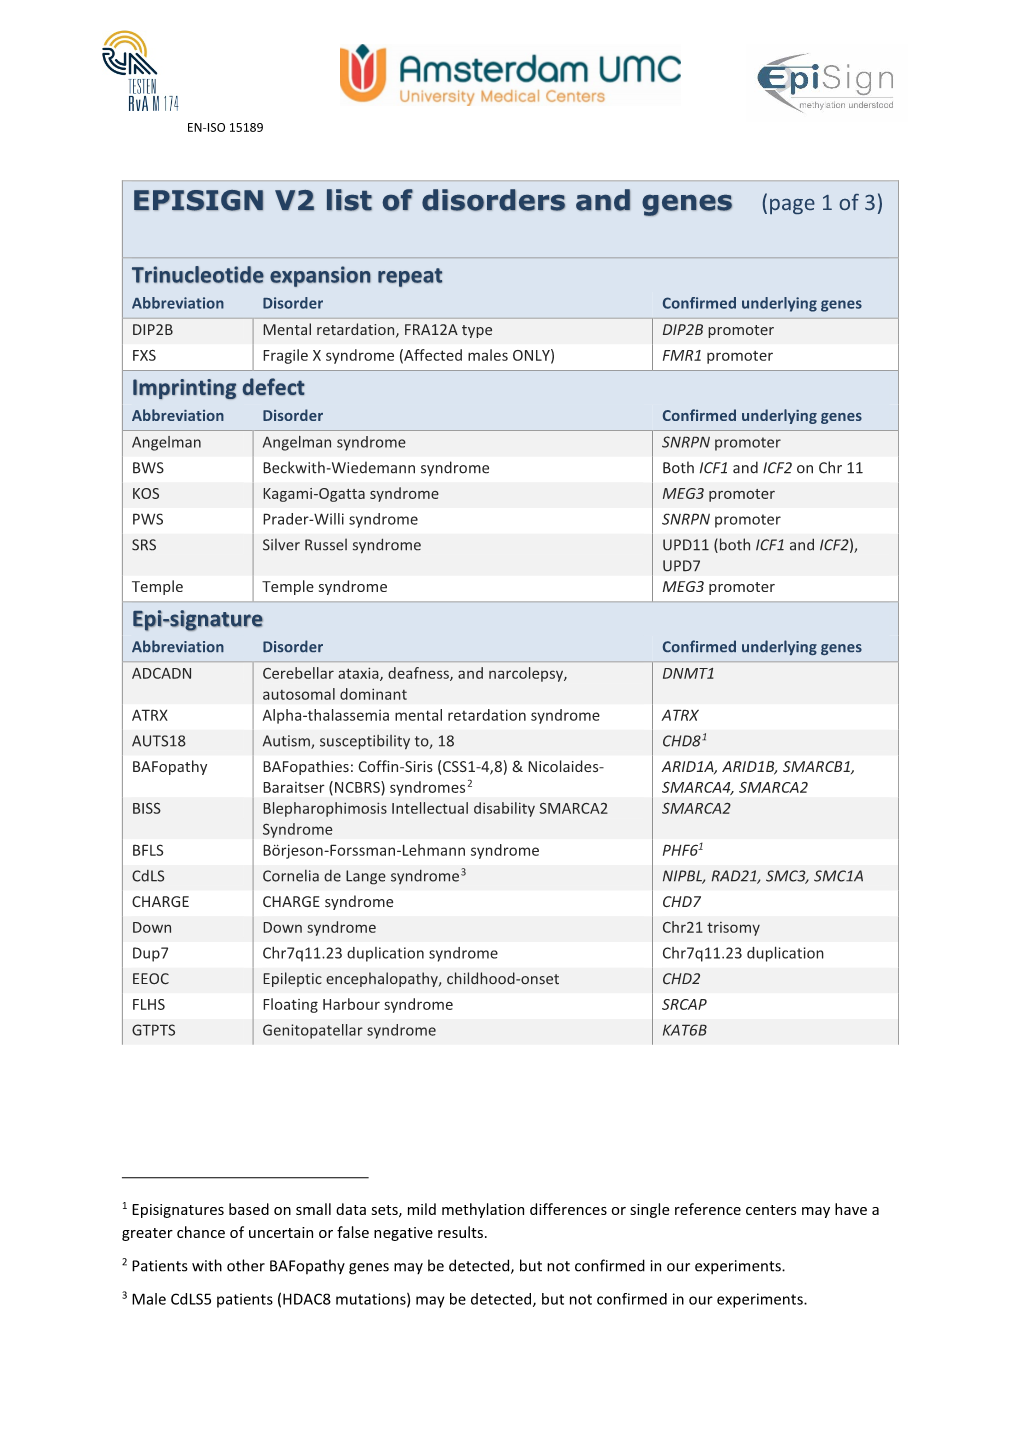 EPISIGN V2 List of Disorders and Genes (Page 1 of 3)